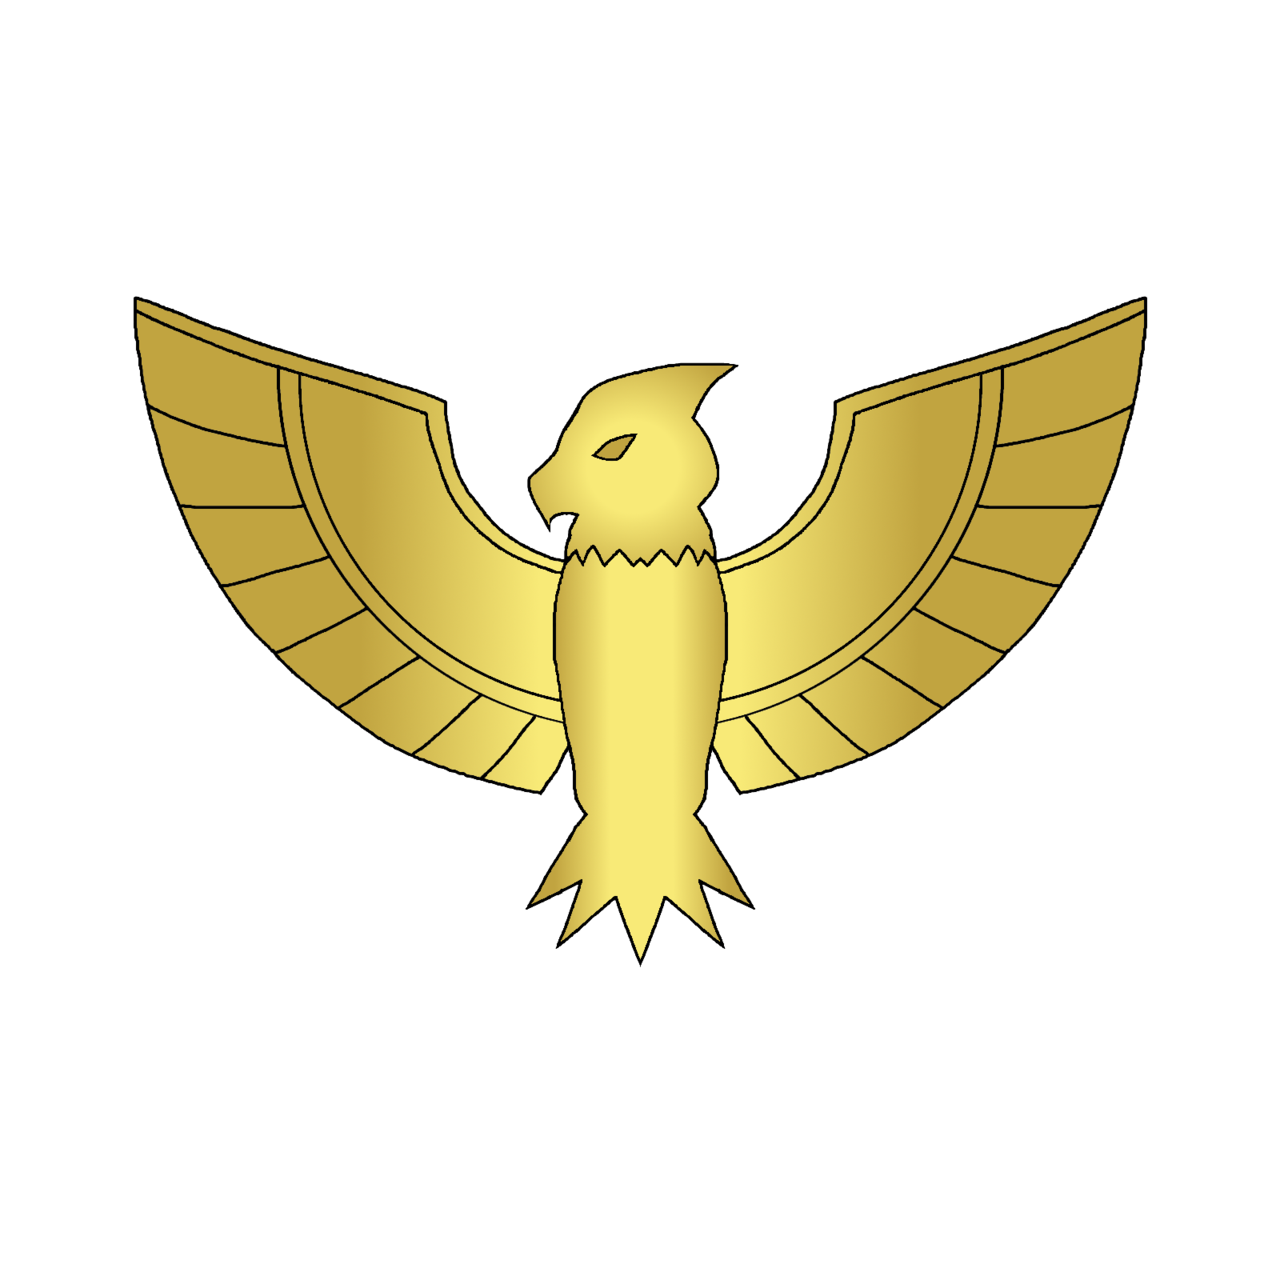 Falcon clipart symbol. Download png image free